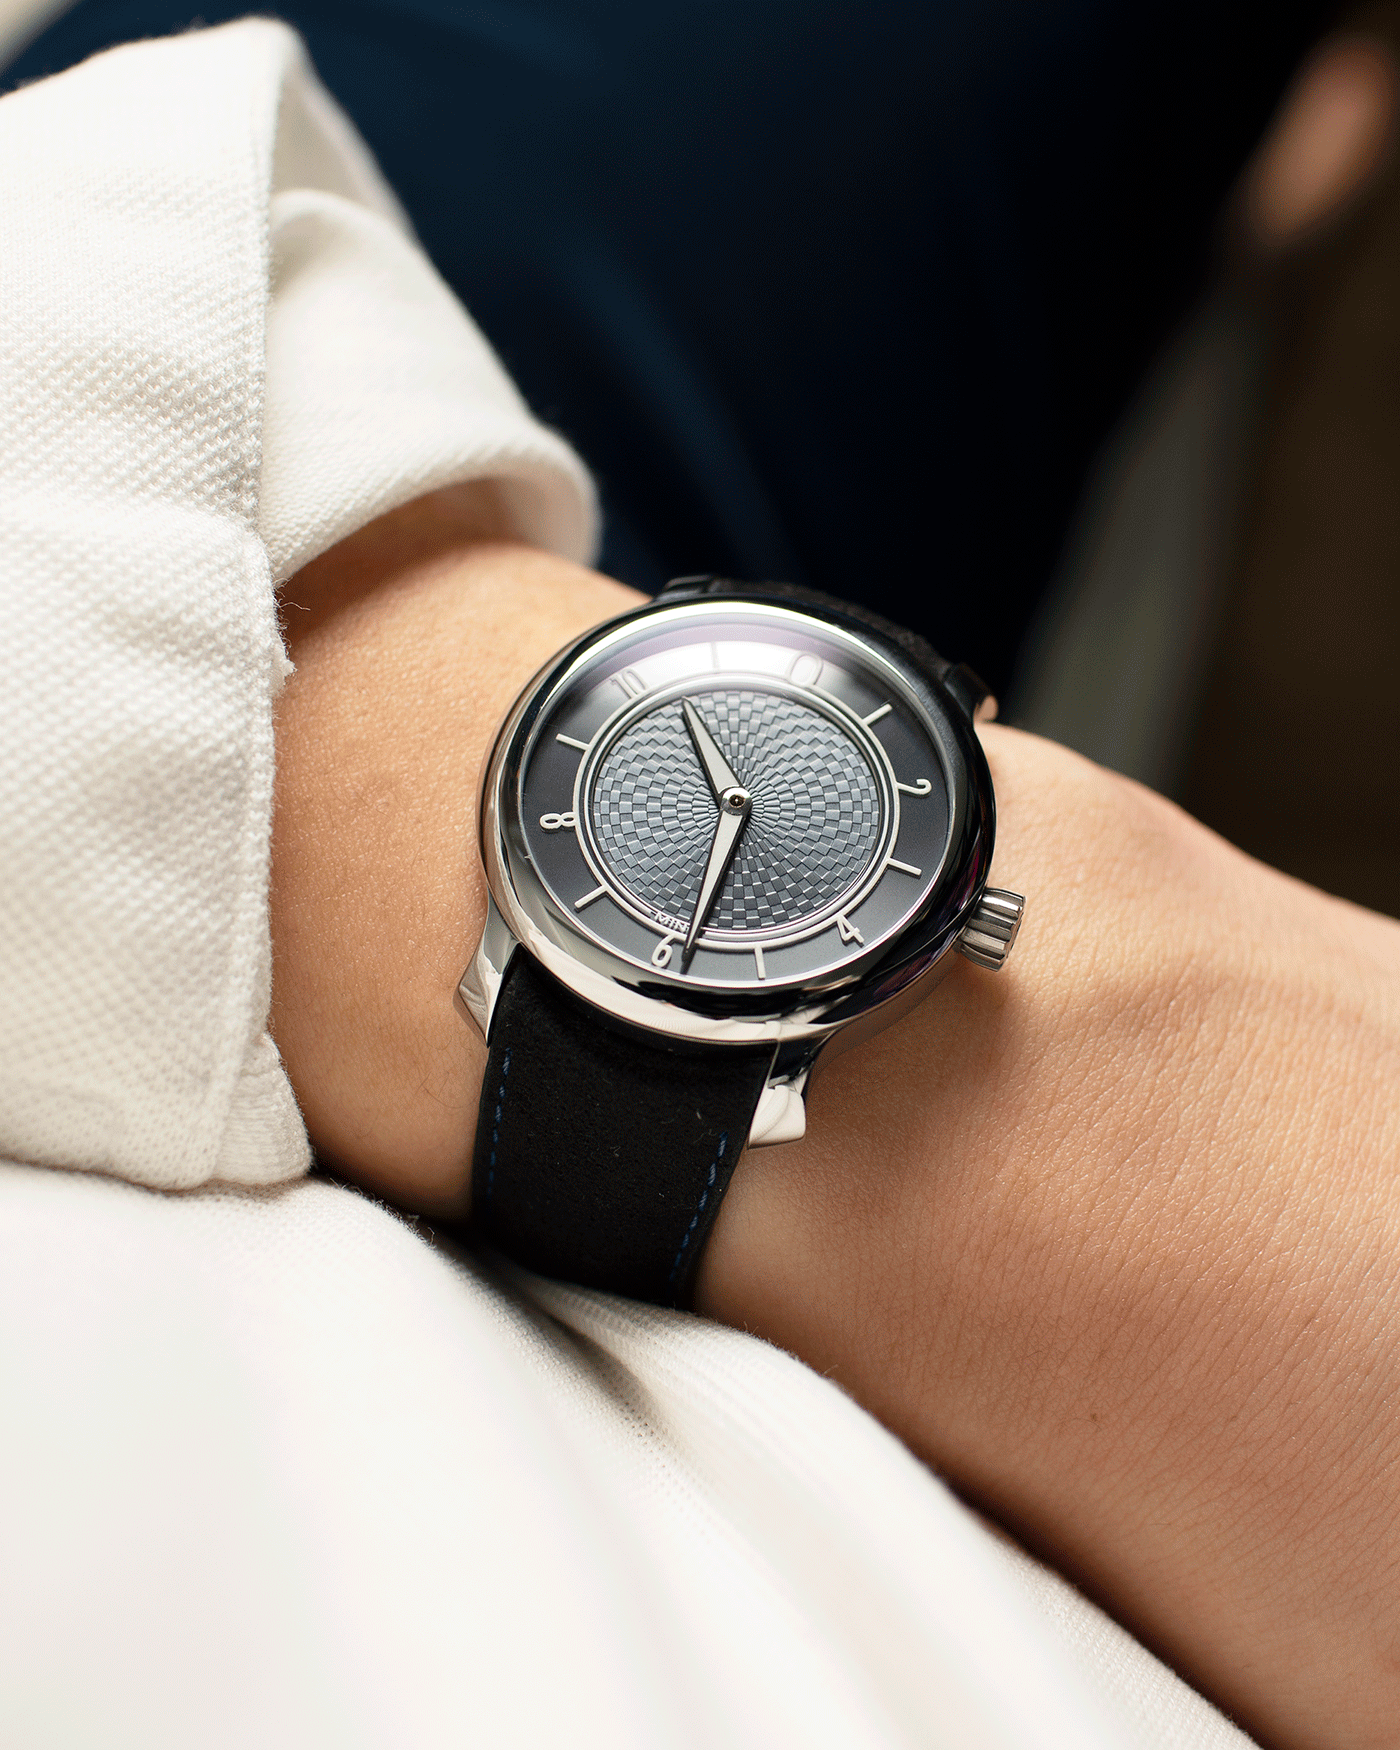 Brand: Ming Year: 2019 Model: 17.06 Material: Stainless Steel Movement: Heavily Modified ETA 2824-2 Case Diameter: 38mm Strap: Jean Rousseau Black Suede with Blue Stitching for MING